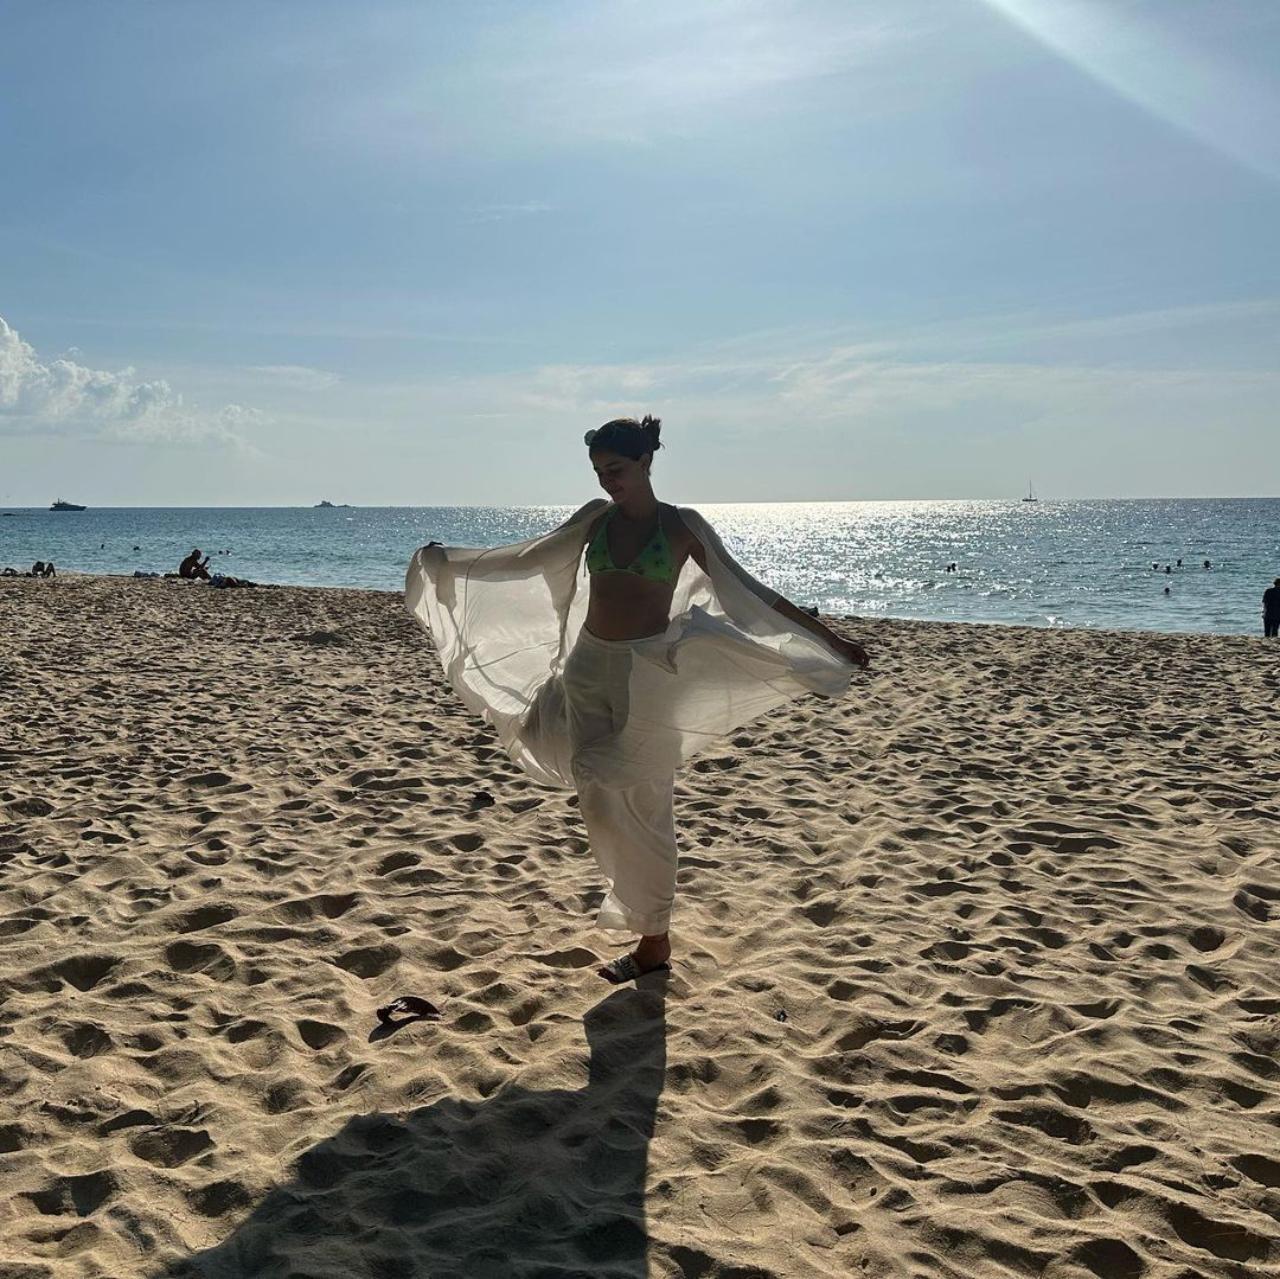 Ananya seems to have spent most of her time at the beach. In yet another picture from the beach on a seemingly sunny afternoon, Ananya can be seen twirling in a white overall over her beach wear. In the picture, she can be seen posing in front of a pristine blue sea and the inviting sand